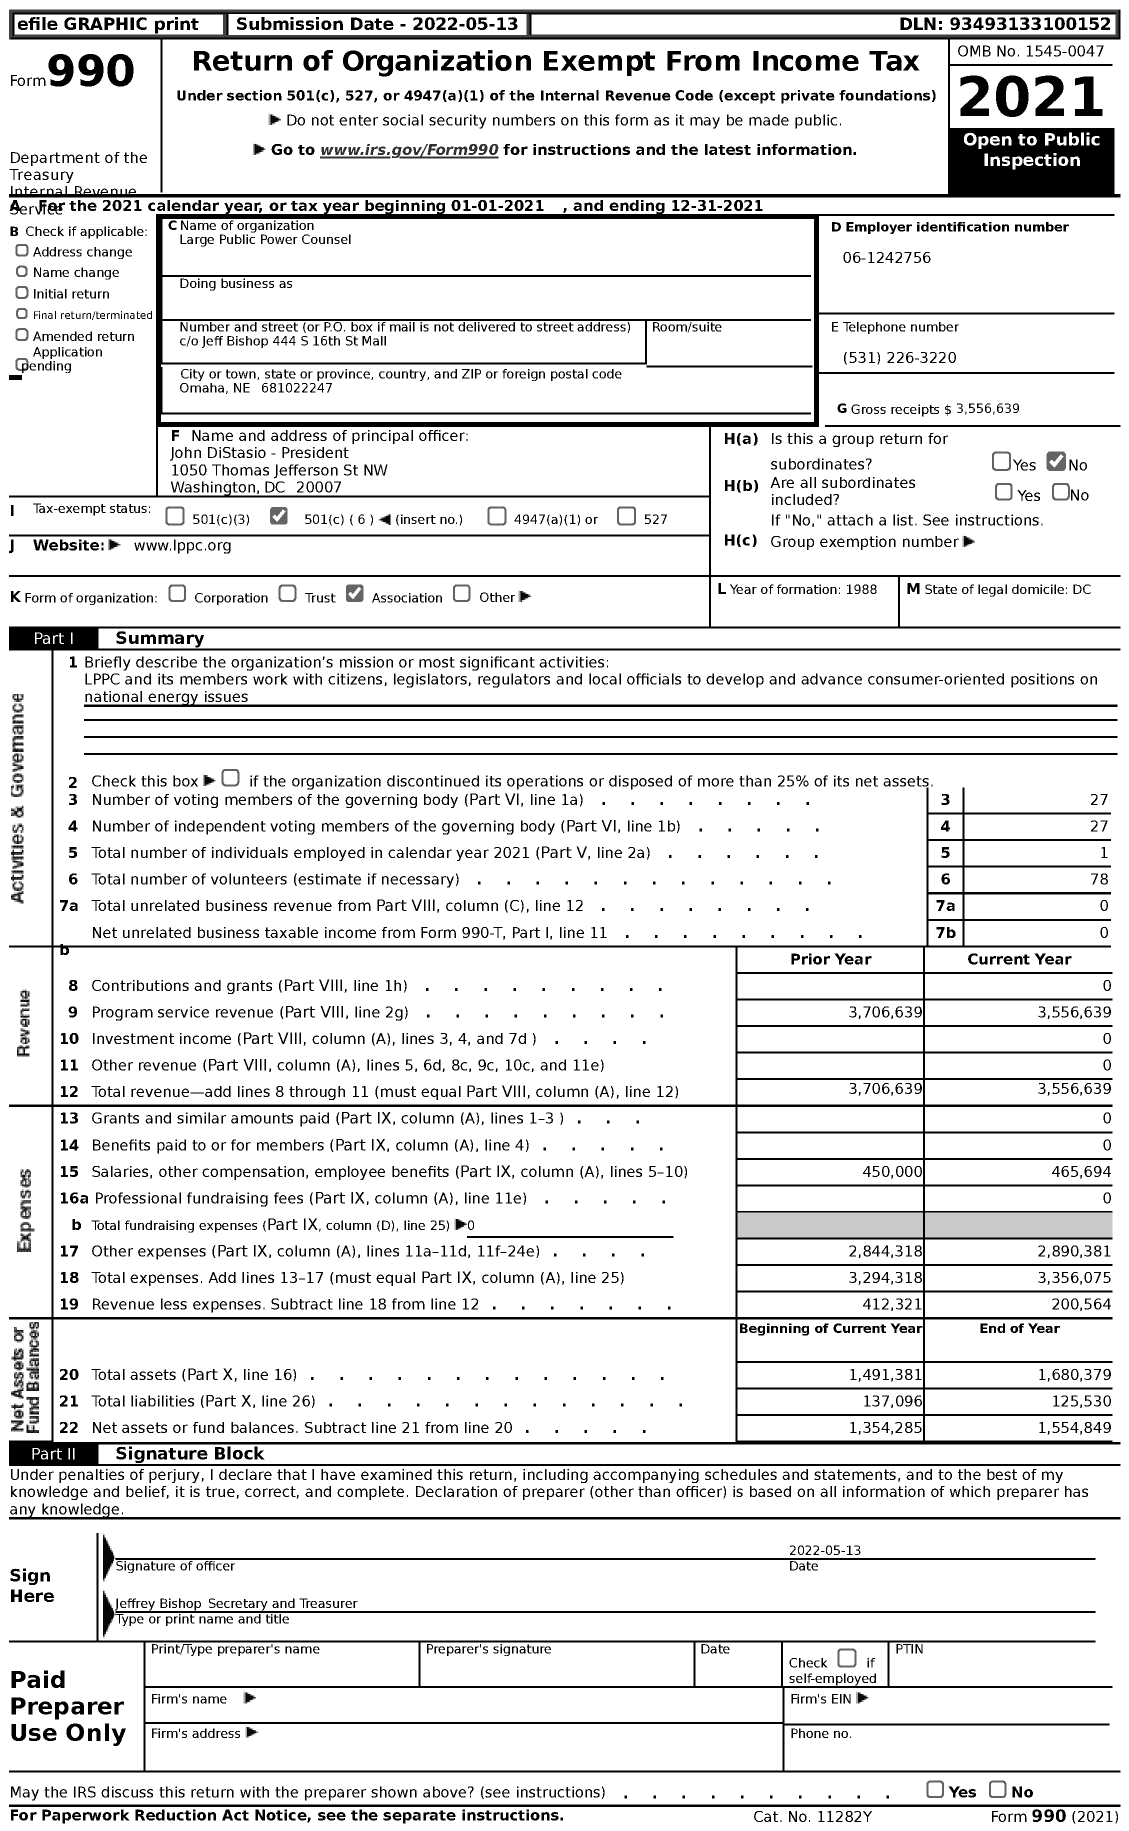 Image of first page of 2021 Form 990 for Large Public Power Counsel (LPPC)